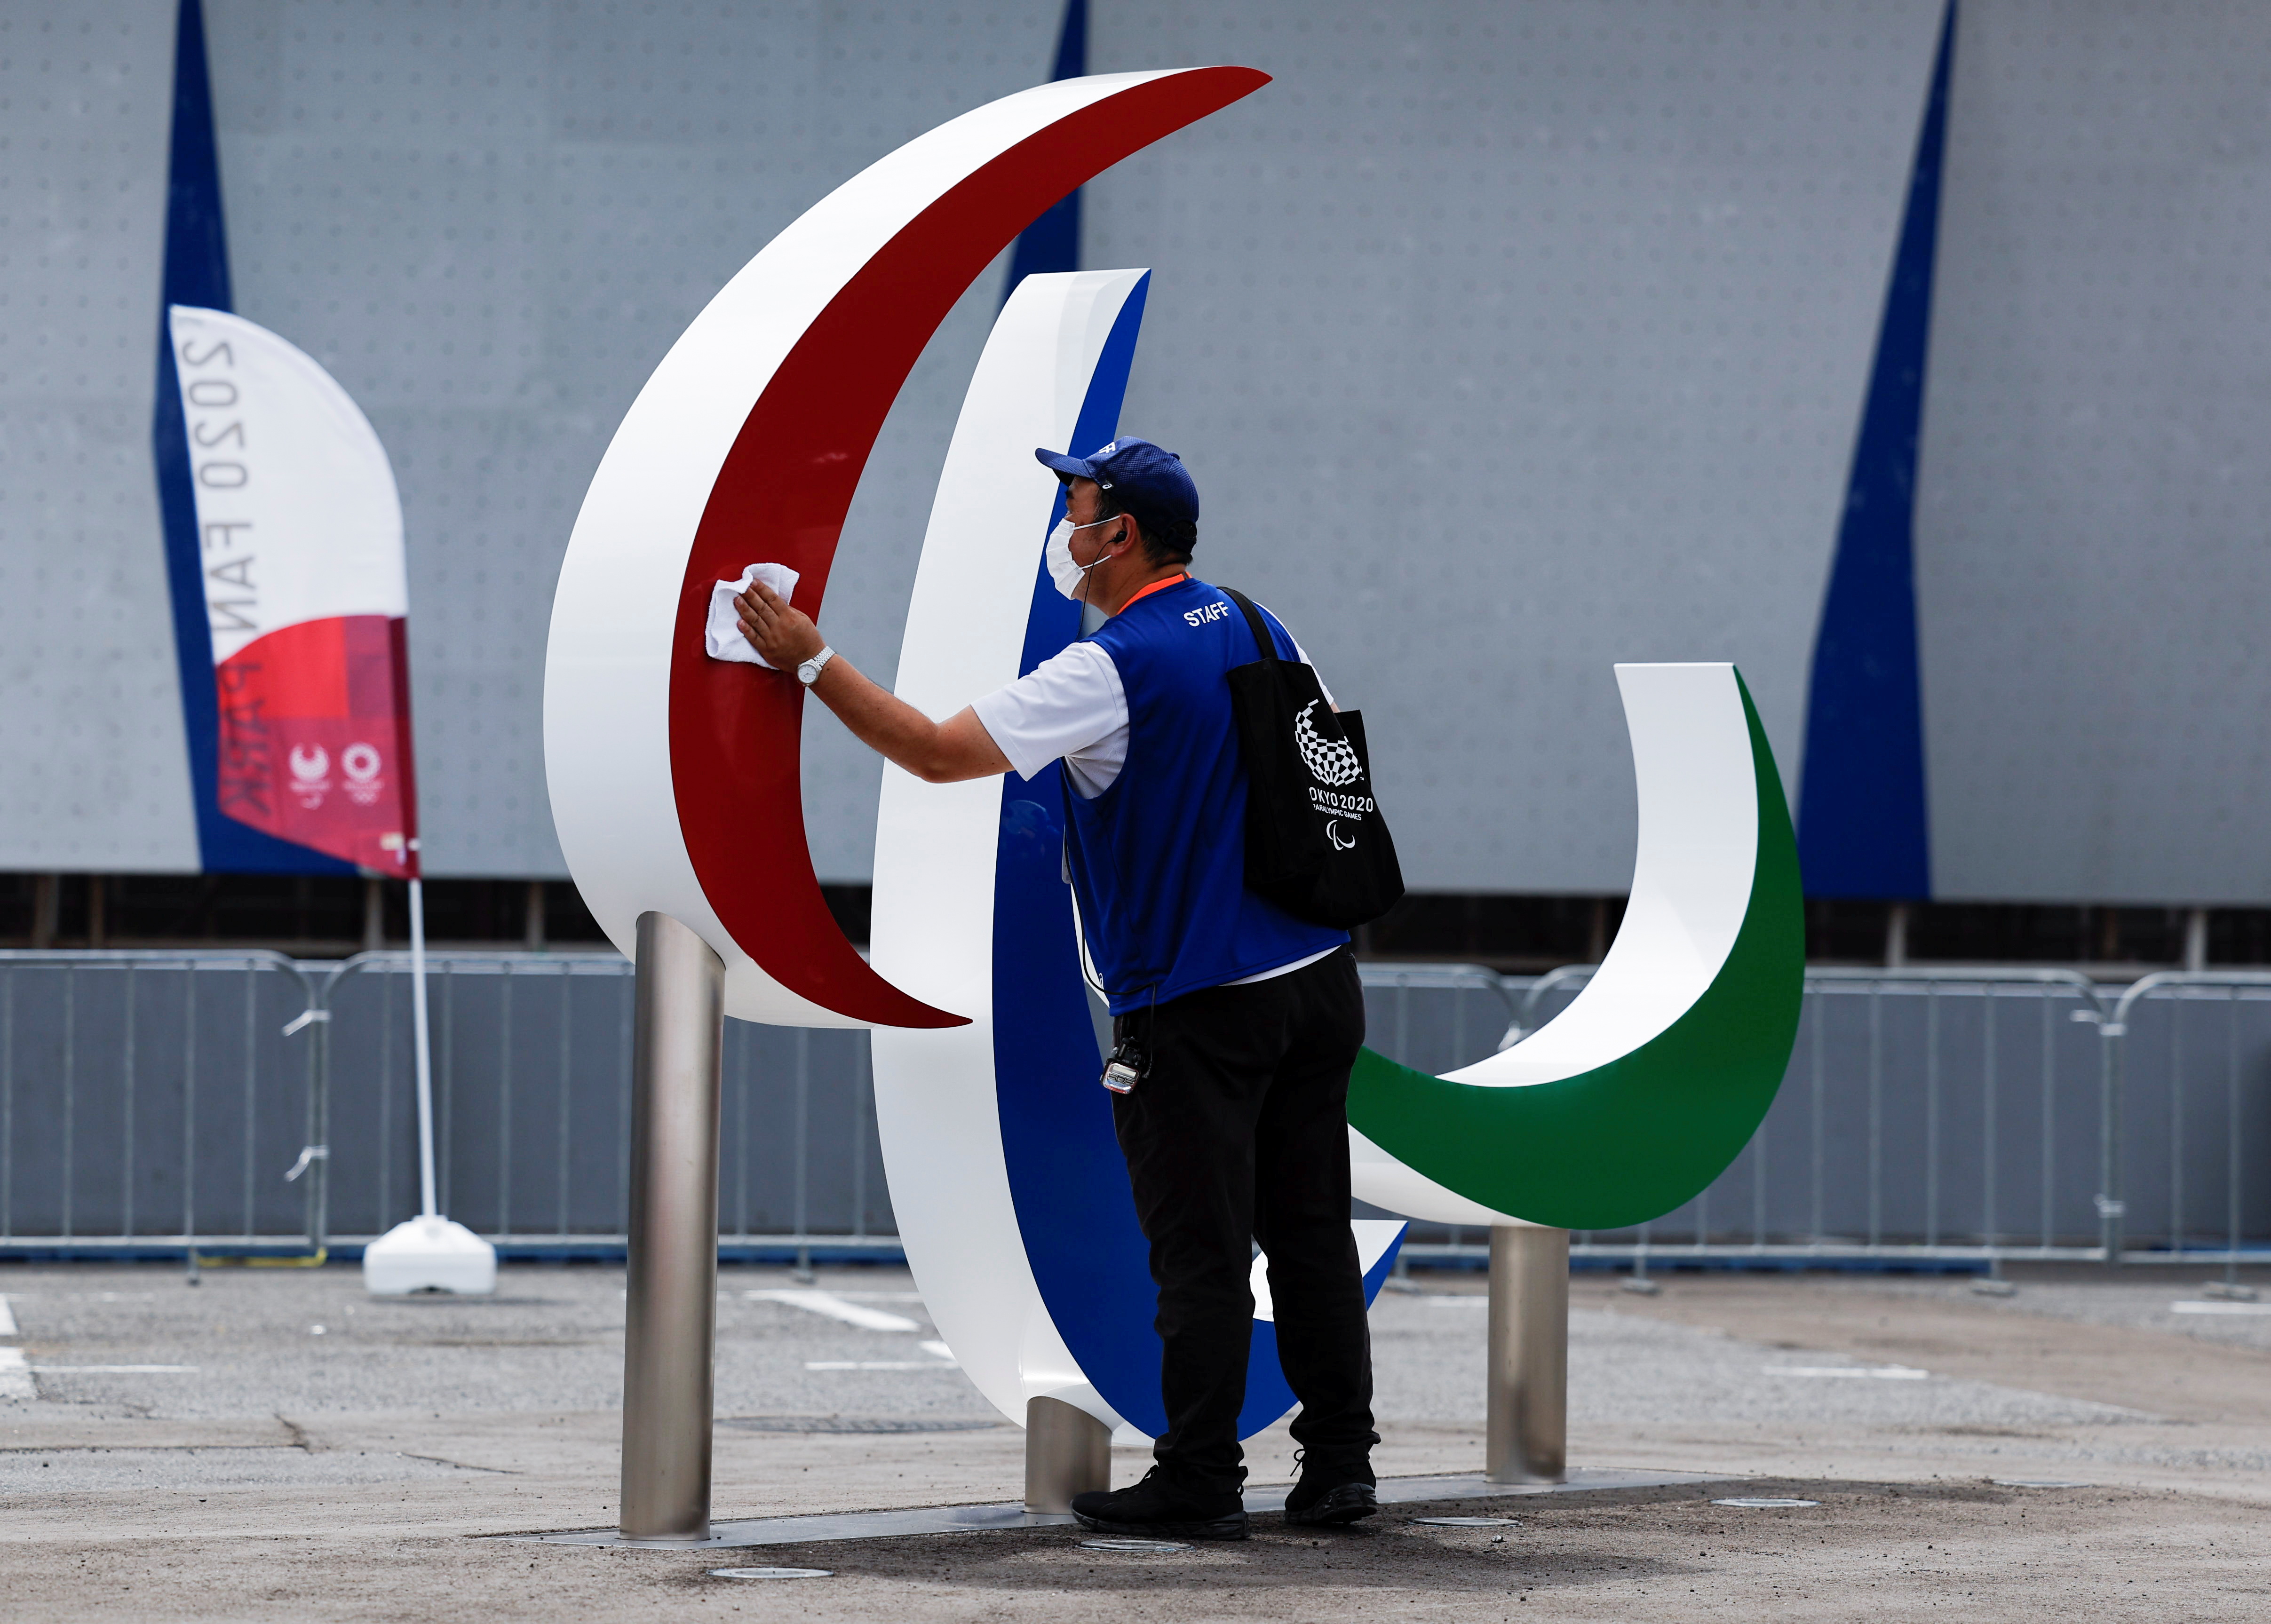 A staff member disinfects the monument of Paralympic symbol 'The three Agitos' in Tokyo